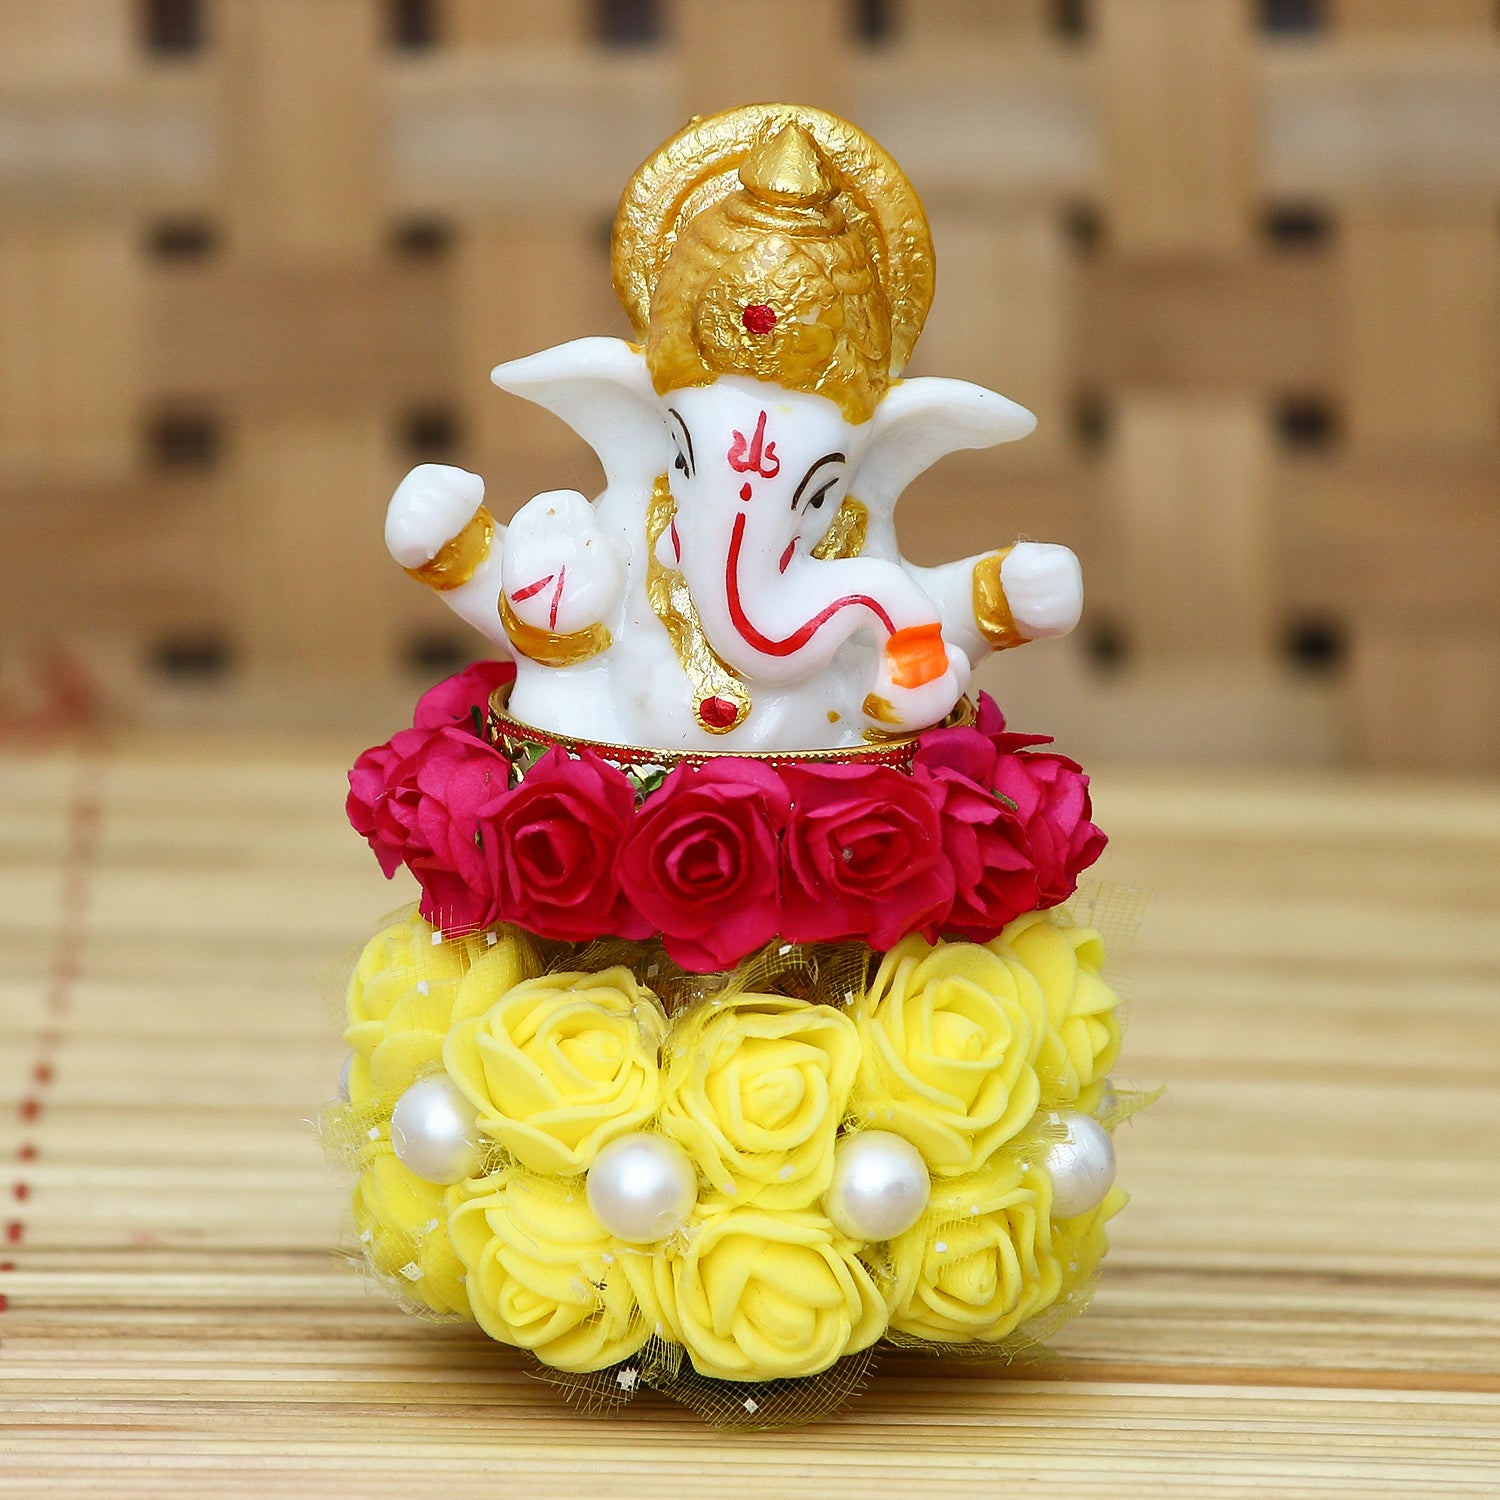 Lord Ganesha Idol On Decorative Handicrafted Plate For Home And Car Dashboard